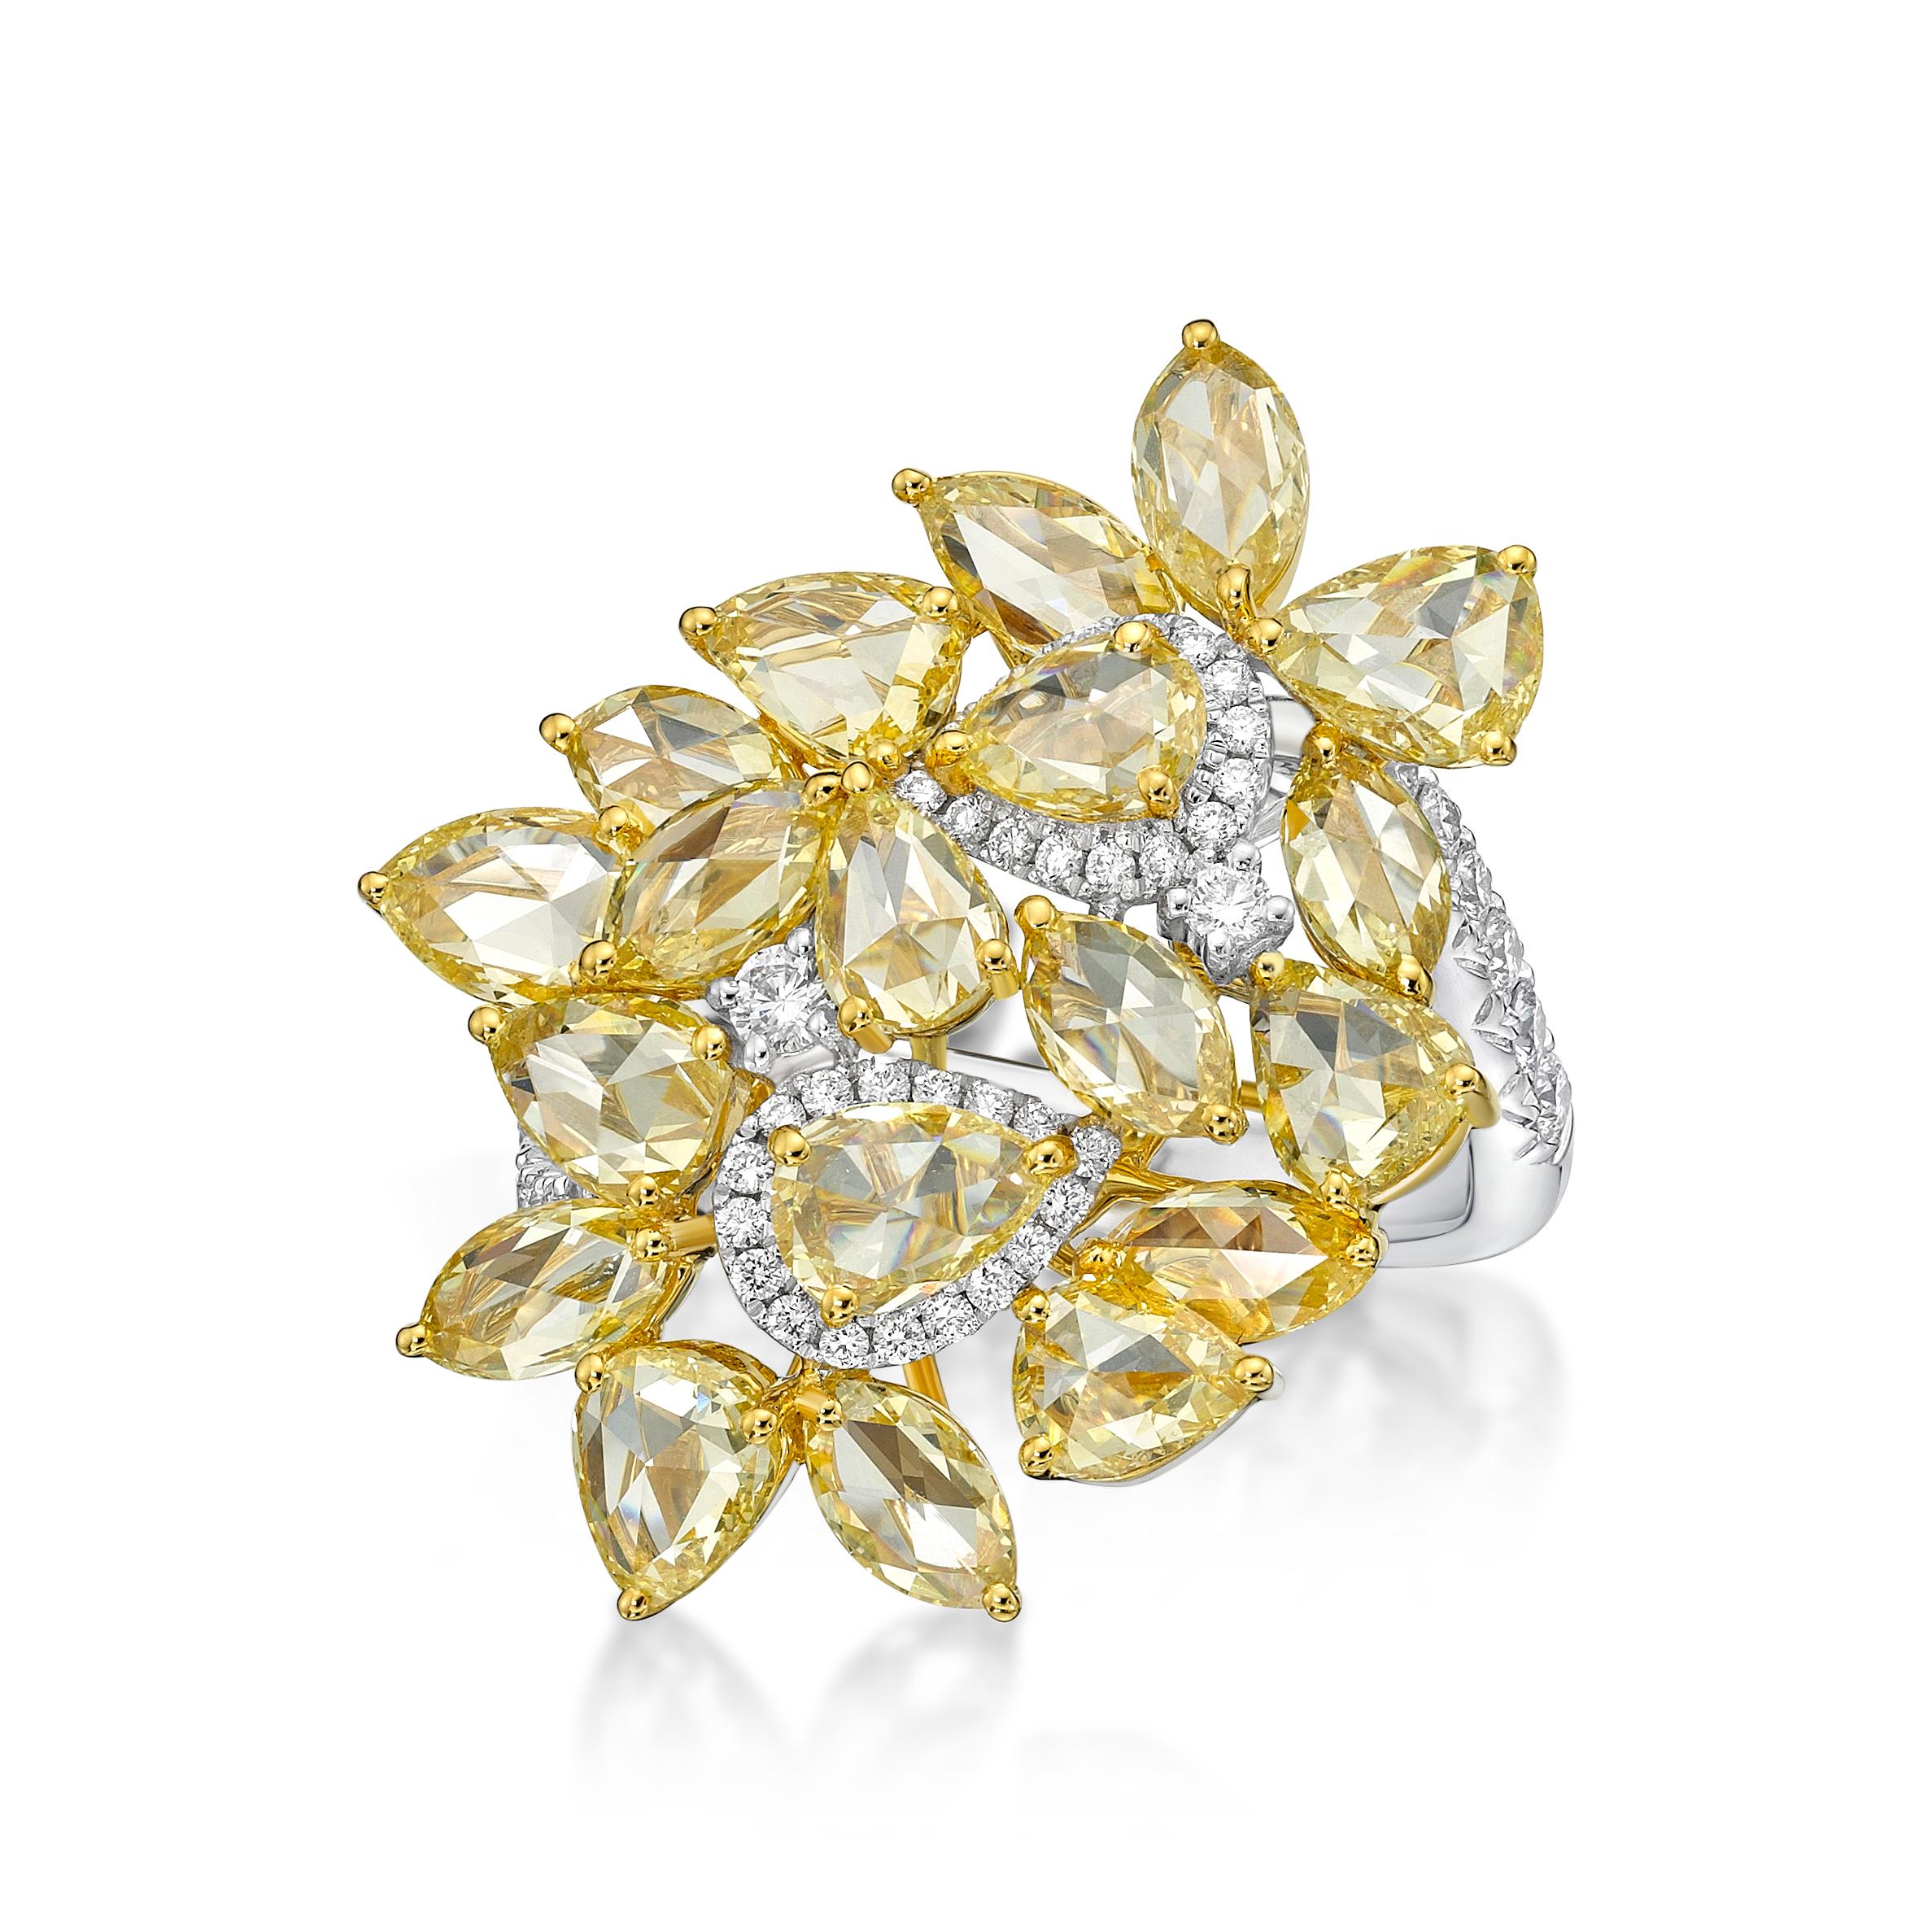 pear and marquise shape of the yellow diamond cluster to create this ring, Designer imagine the rose cut yellow diamond as the petal of the flower and clustered around with the center one with a halo to outline the subject. A total of 19 pcs of